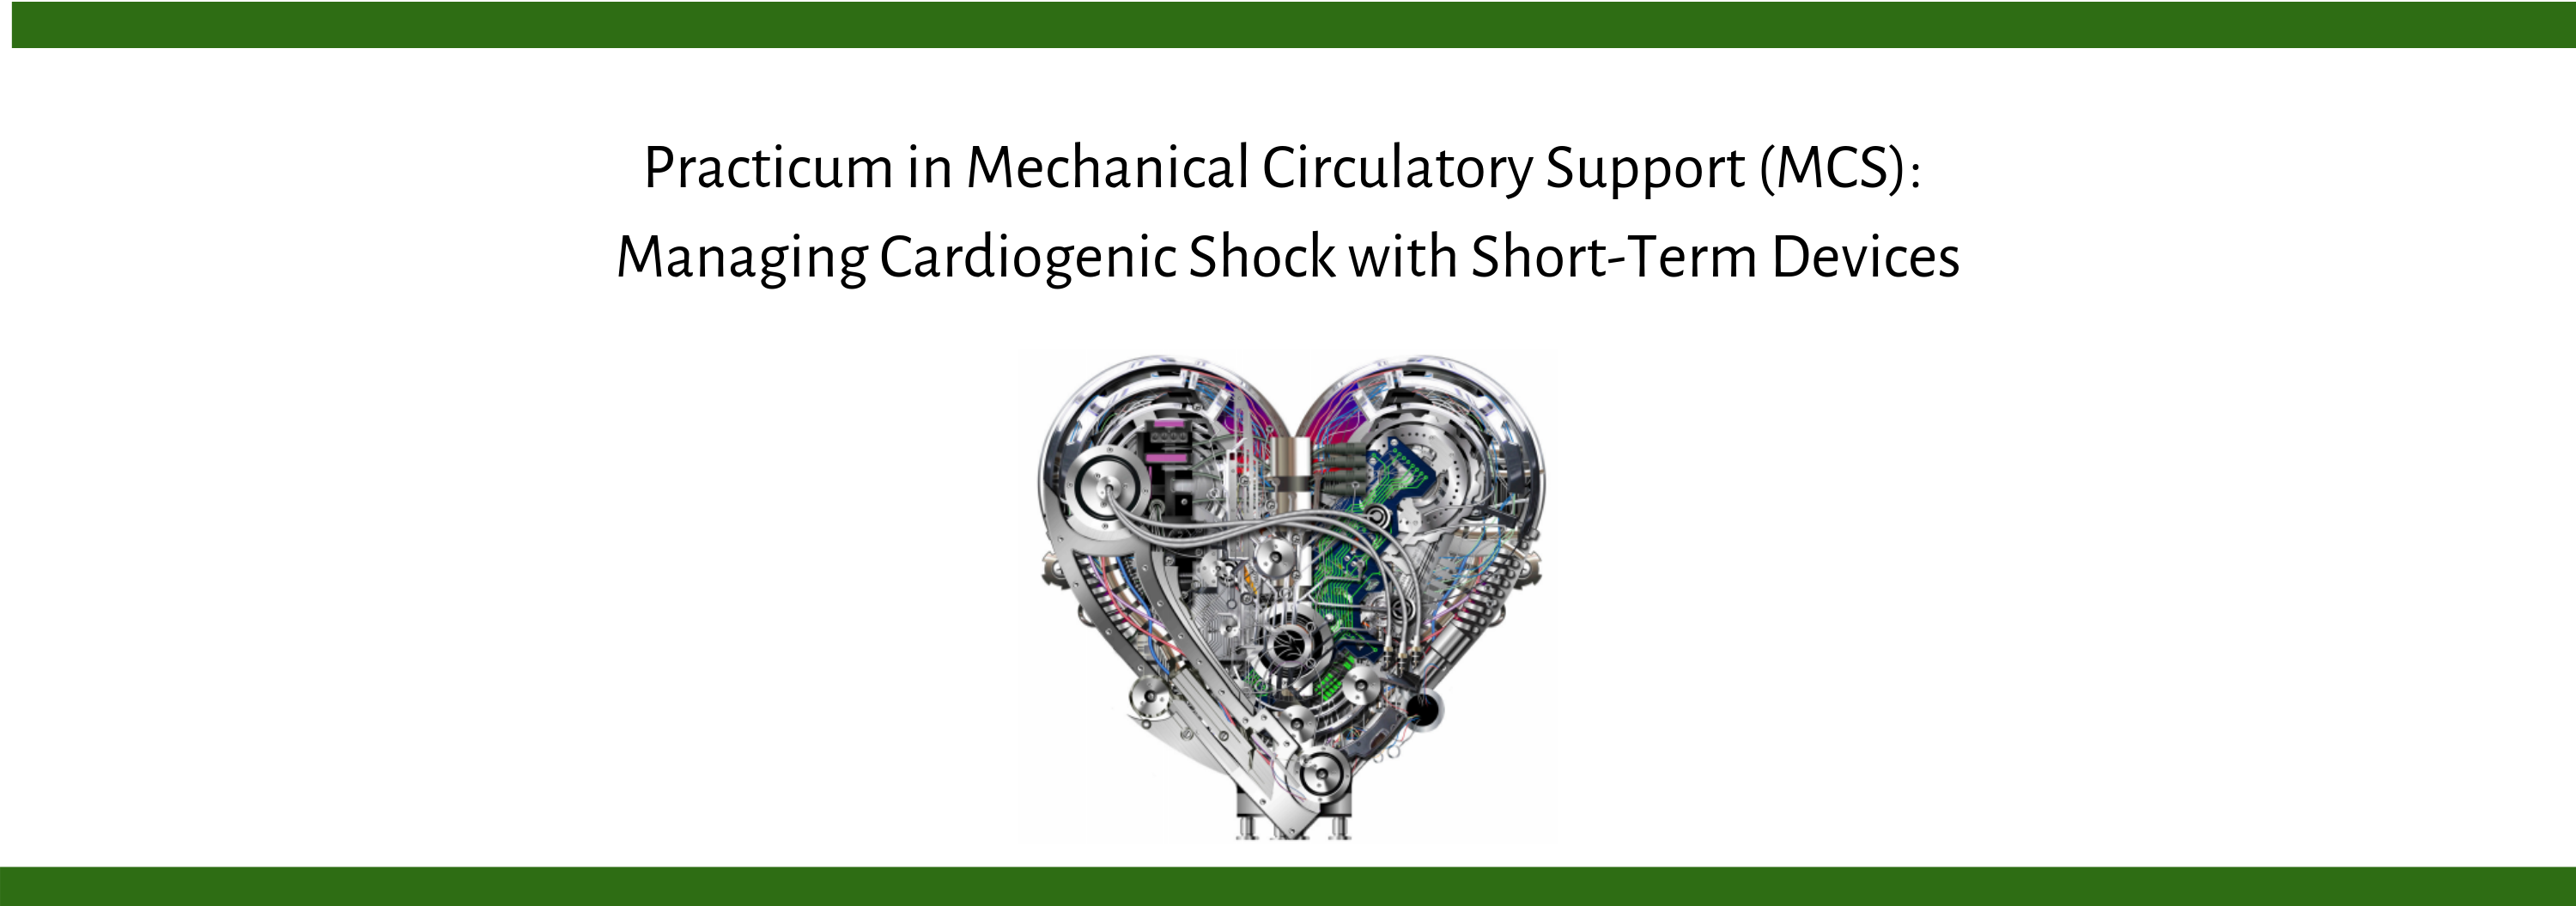 Practicum in Mechanical Circulatory Support (MCS): Managing Cardiogenic Shock with Short-Term Devices Banner